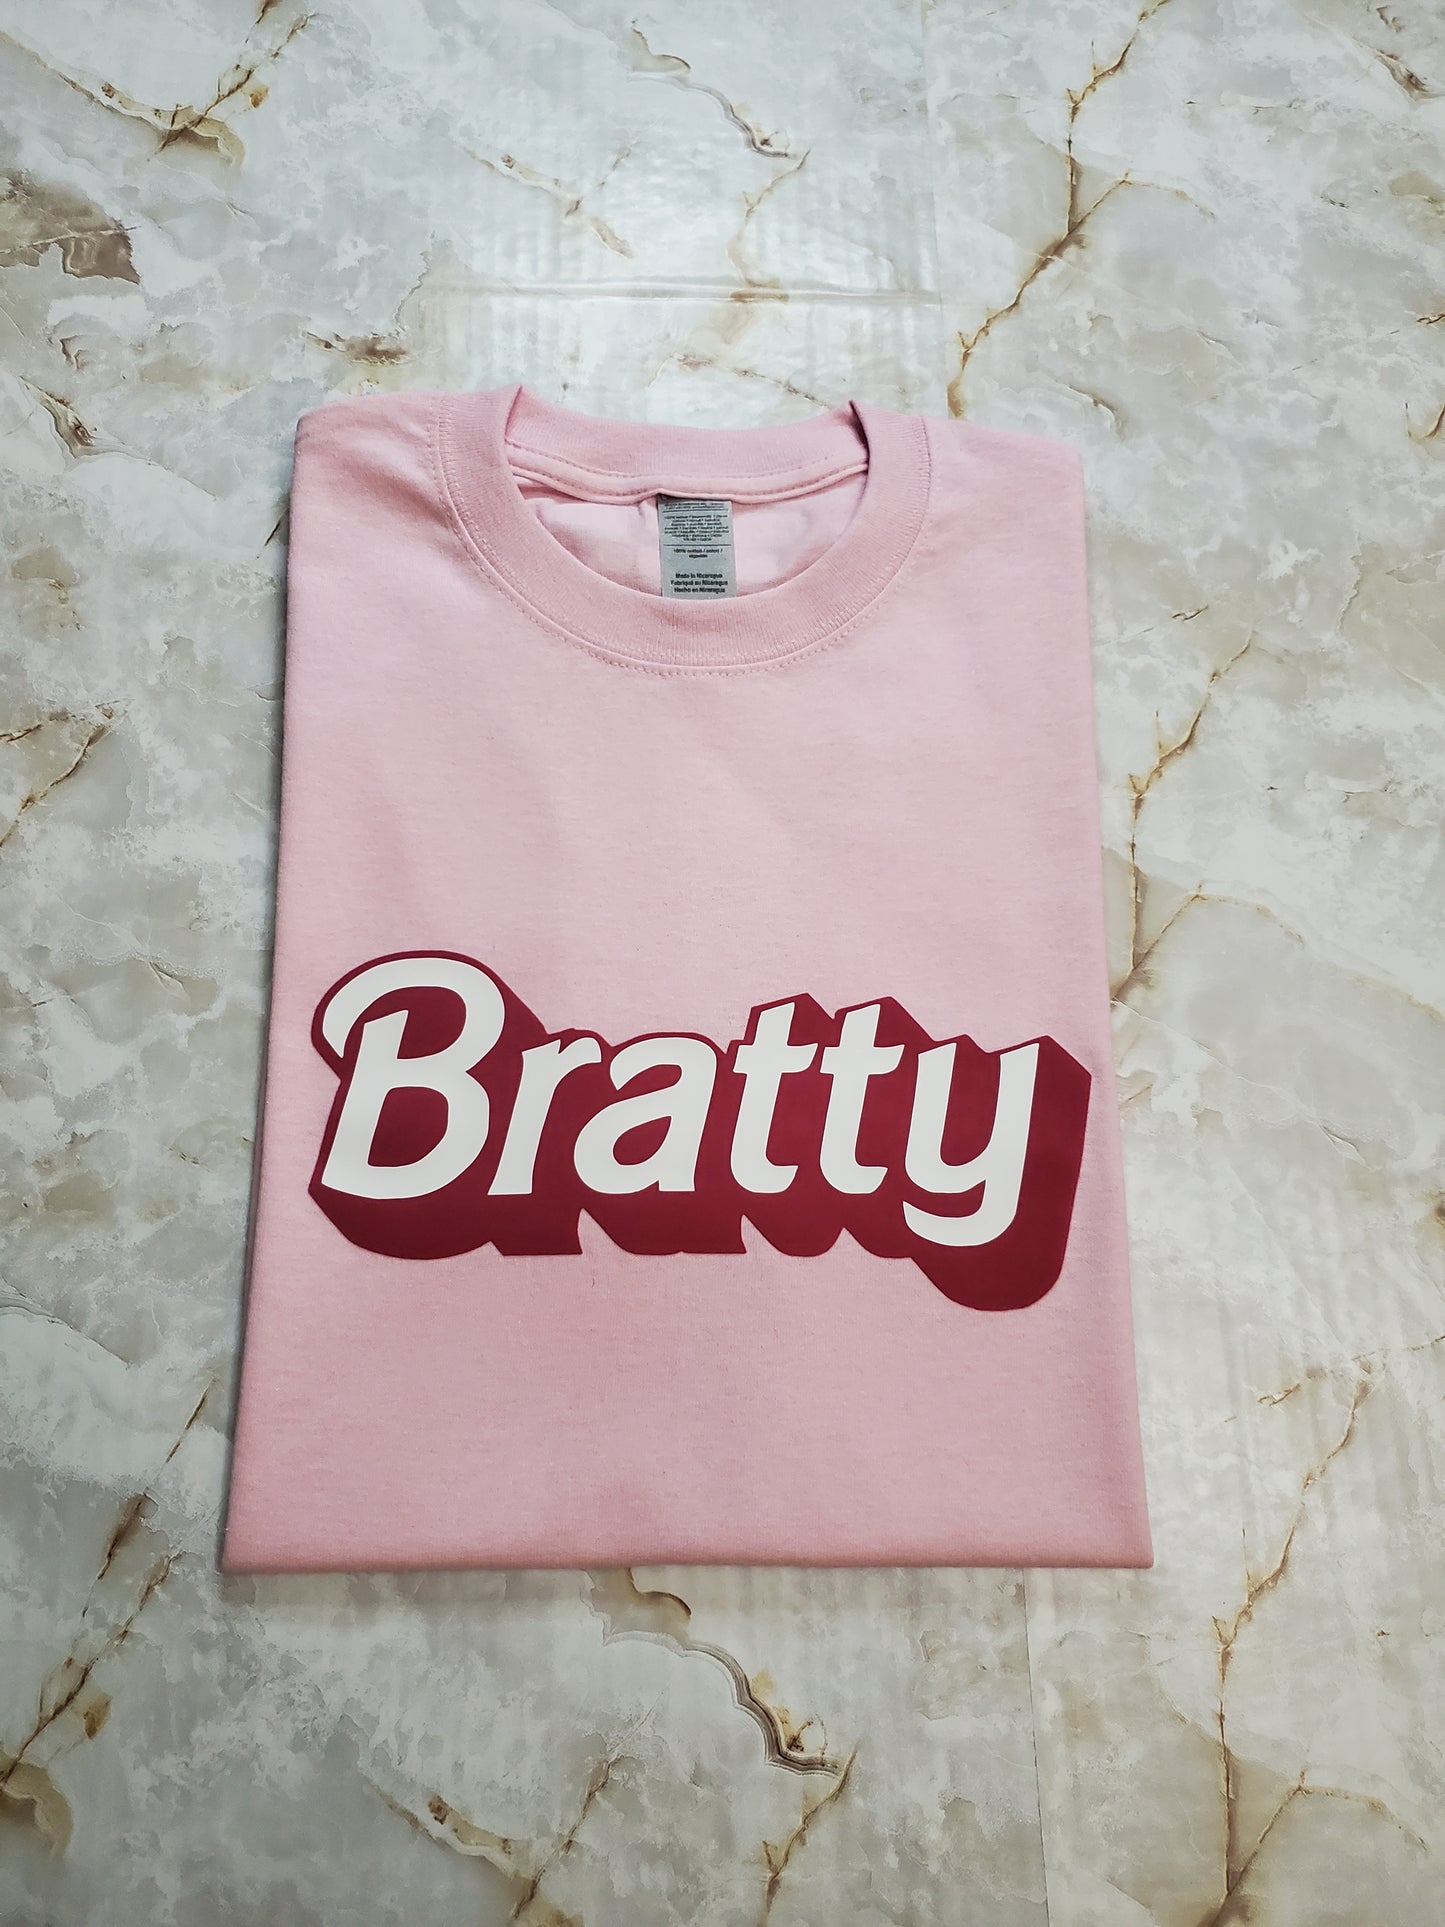 Bratty T-Shirt - Centre Ave Clothing Co.